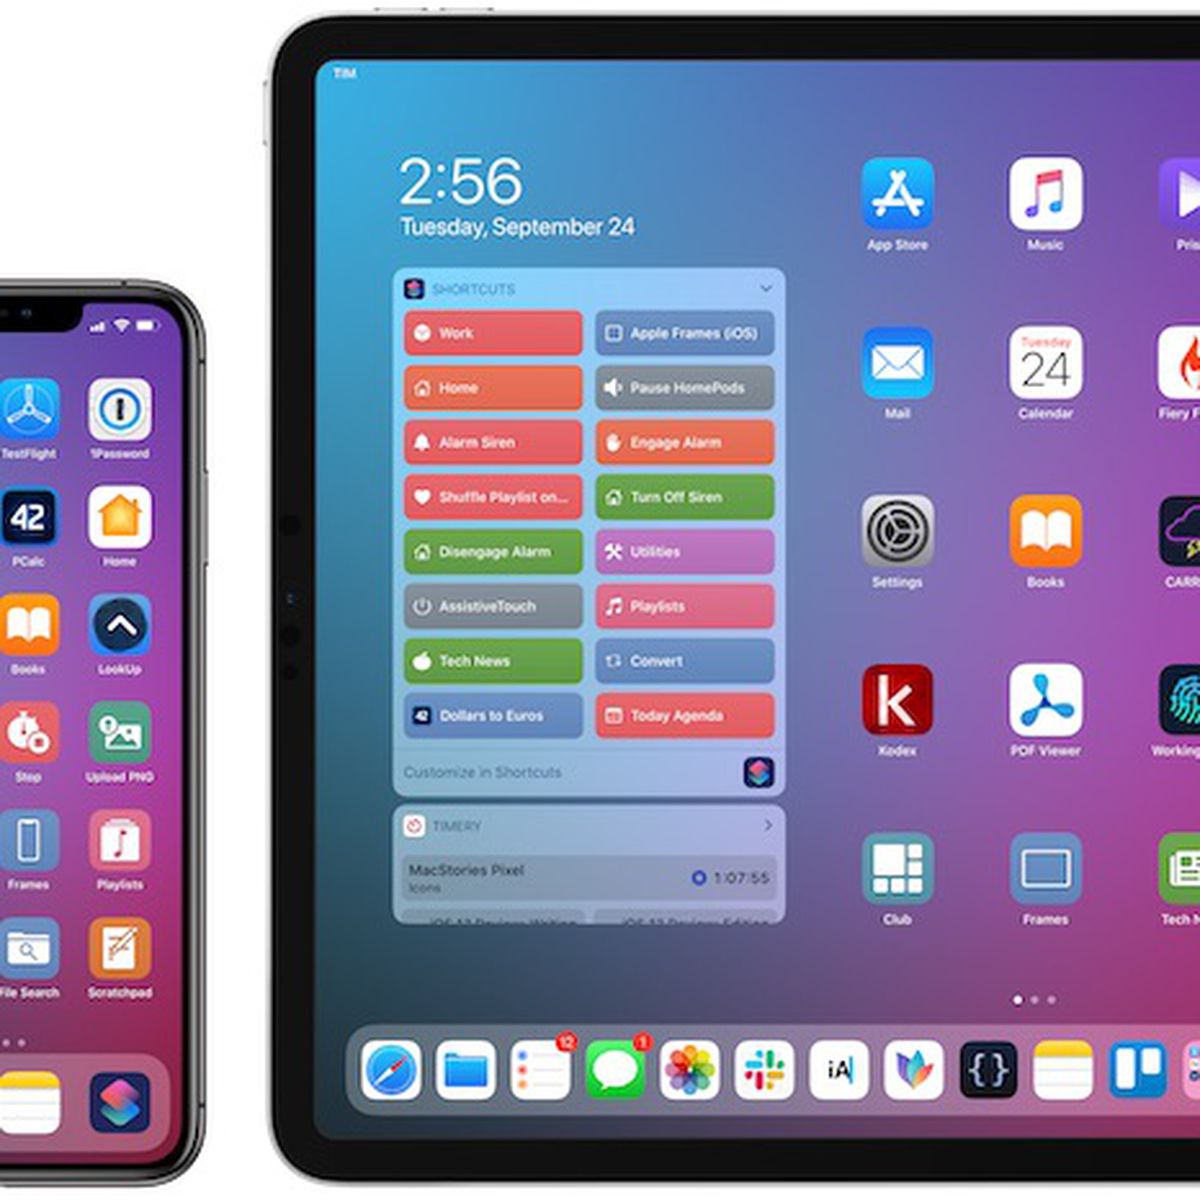 MacStories Releases 300 Custom Shortcuts Icons for iPhone and iPad -  MacRumors